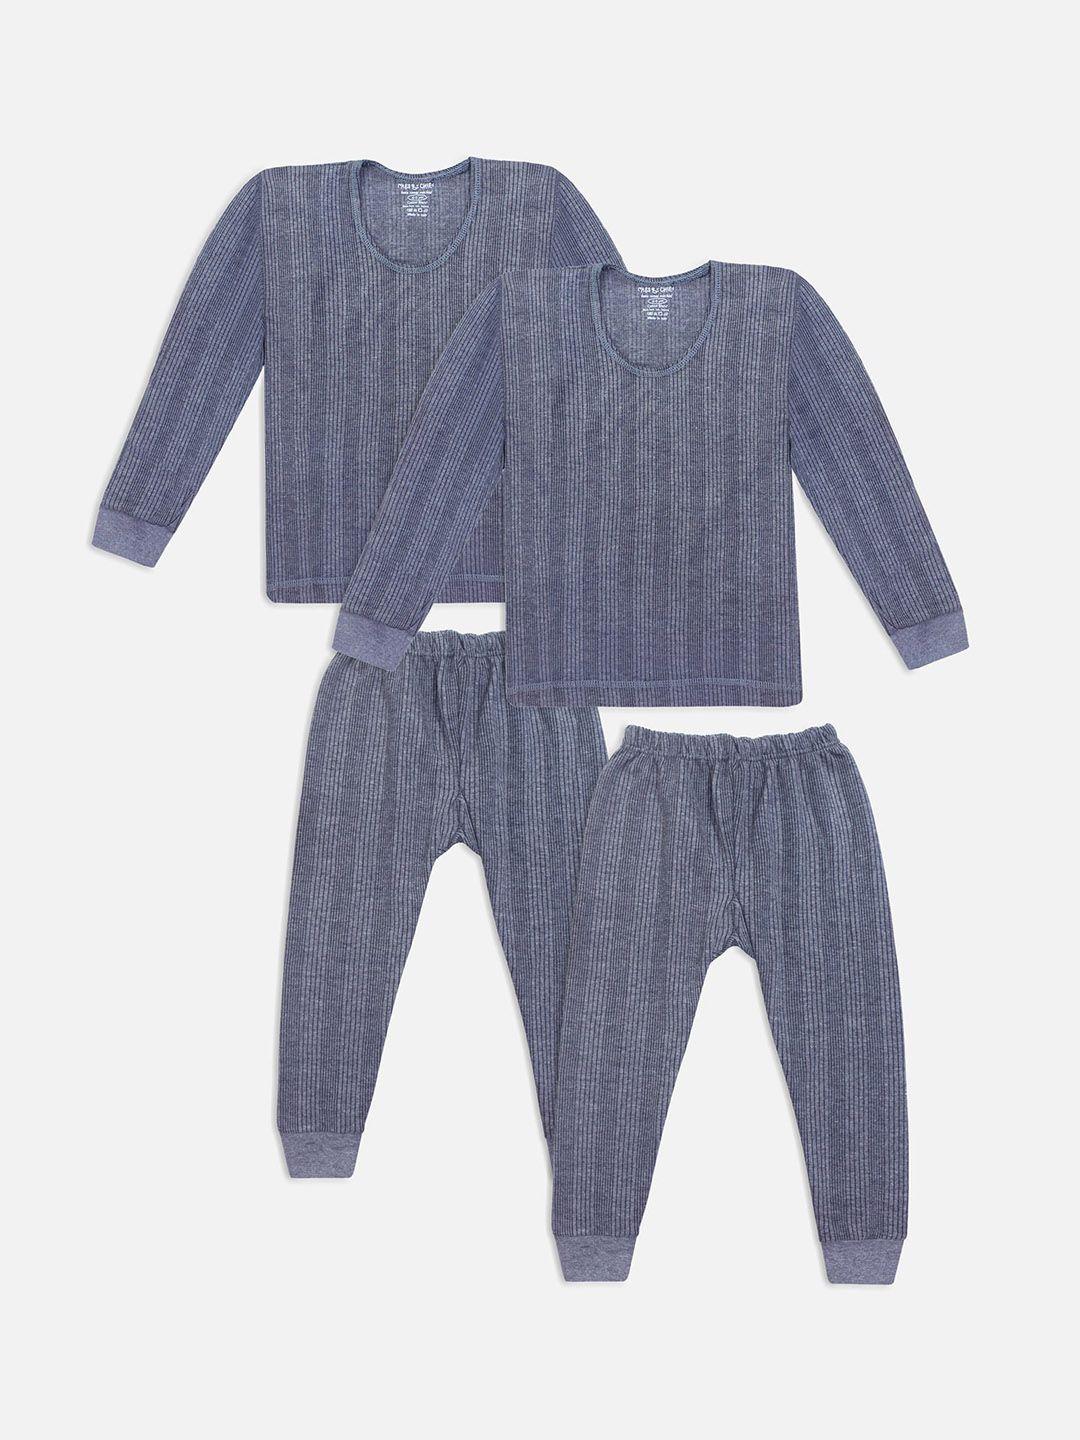 miss & chief unisex kids blue set of 2 striped thermal set